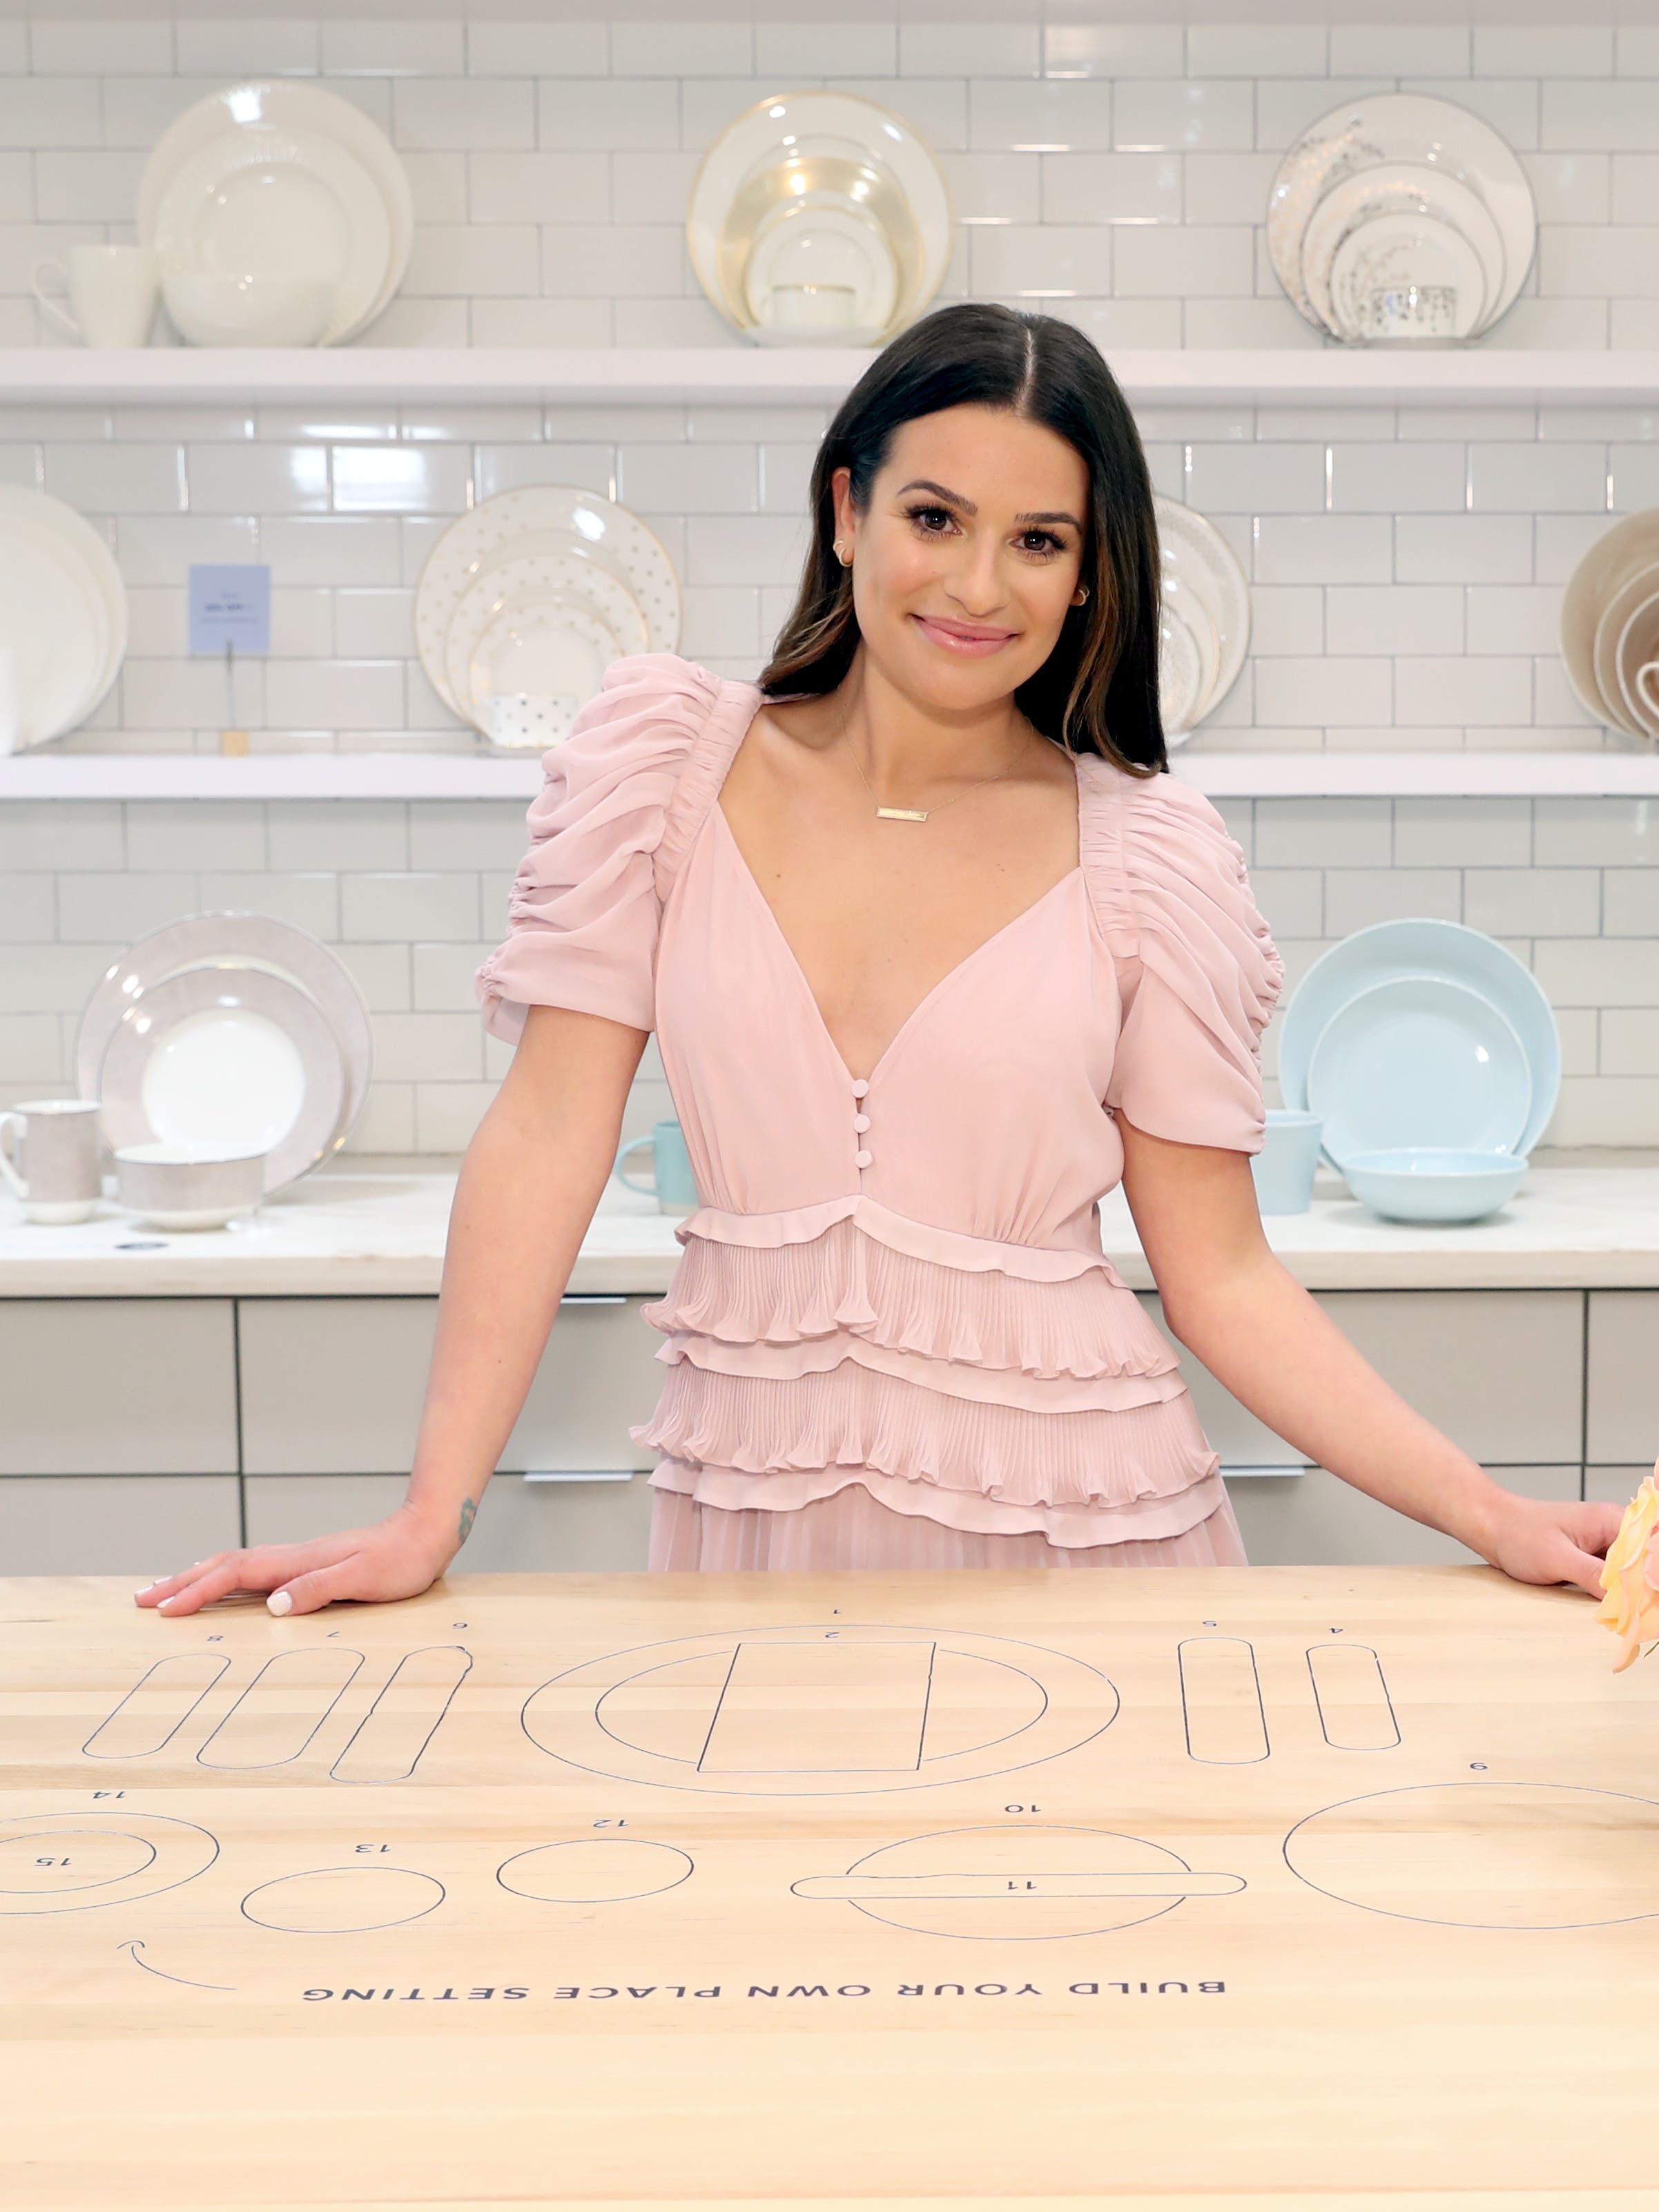 Lea Michele Says “I Do” and “I Don’t” to Popular Wedding Trends